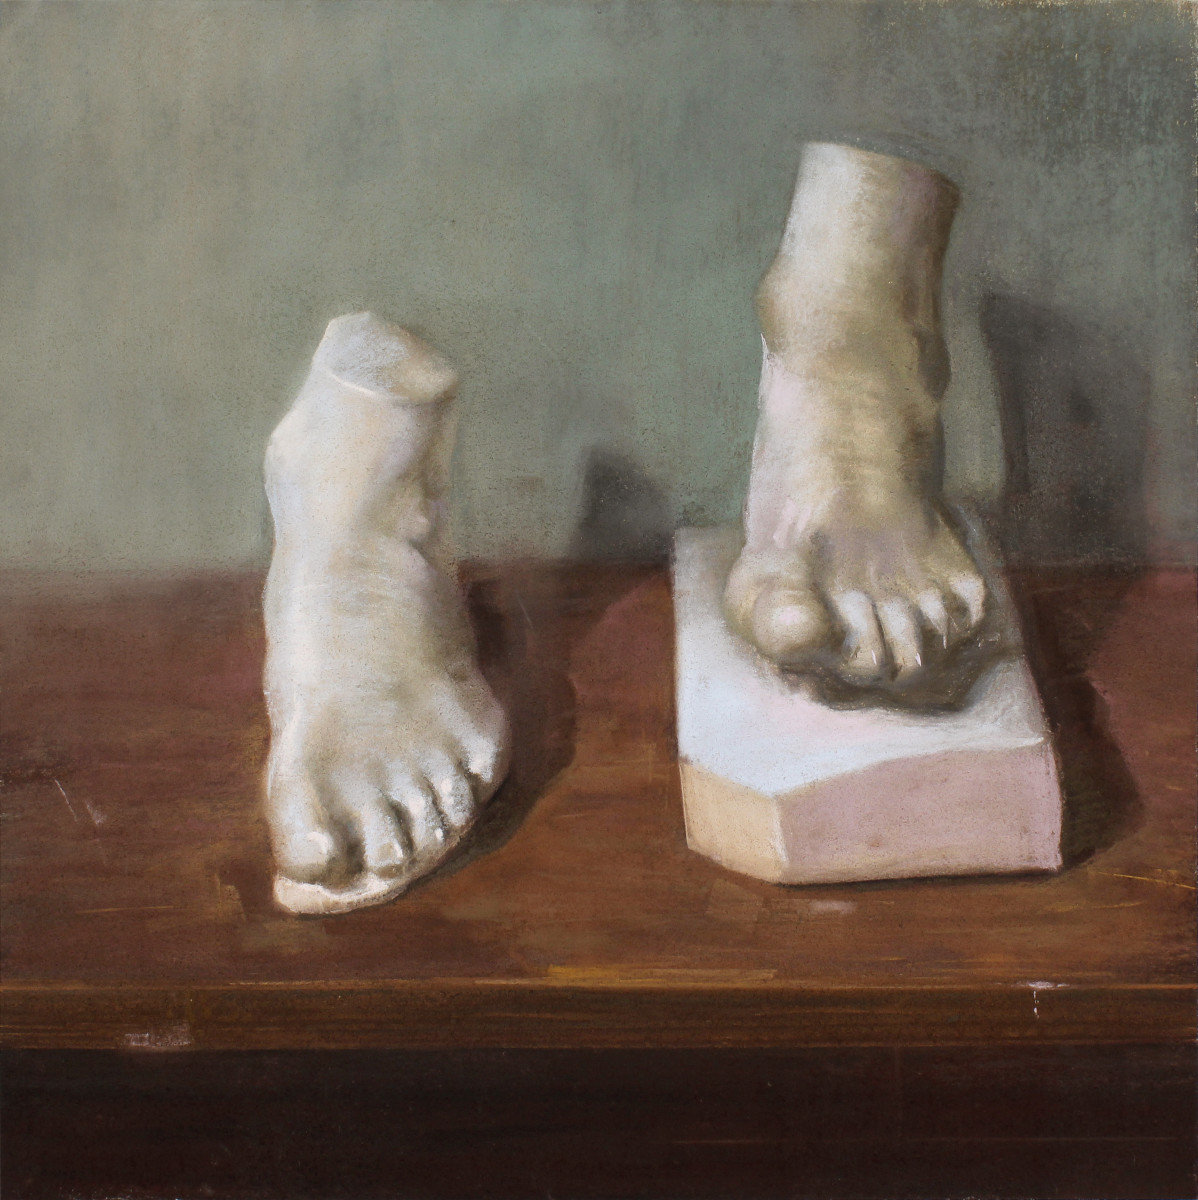 Two Left Feet by Samantha Haring 